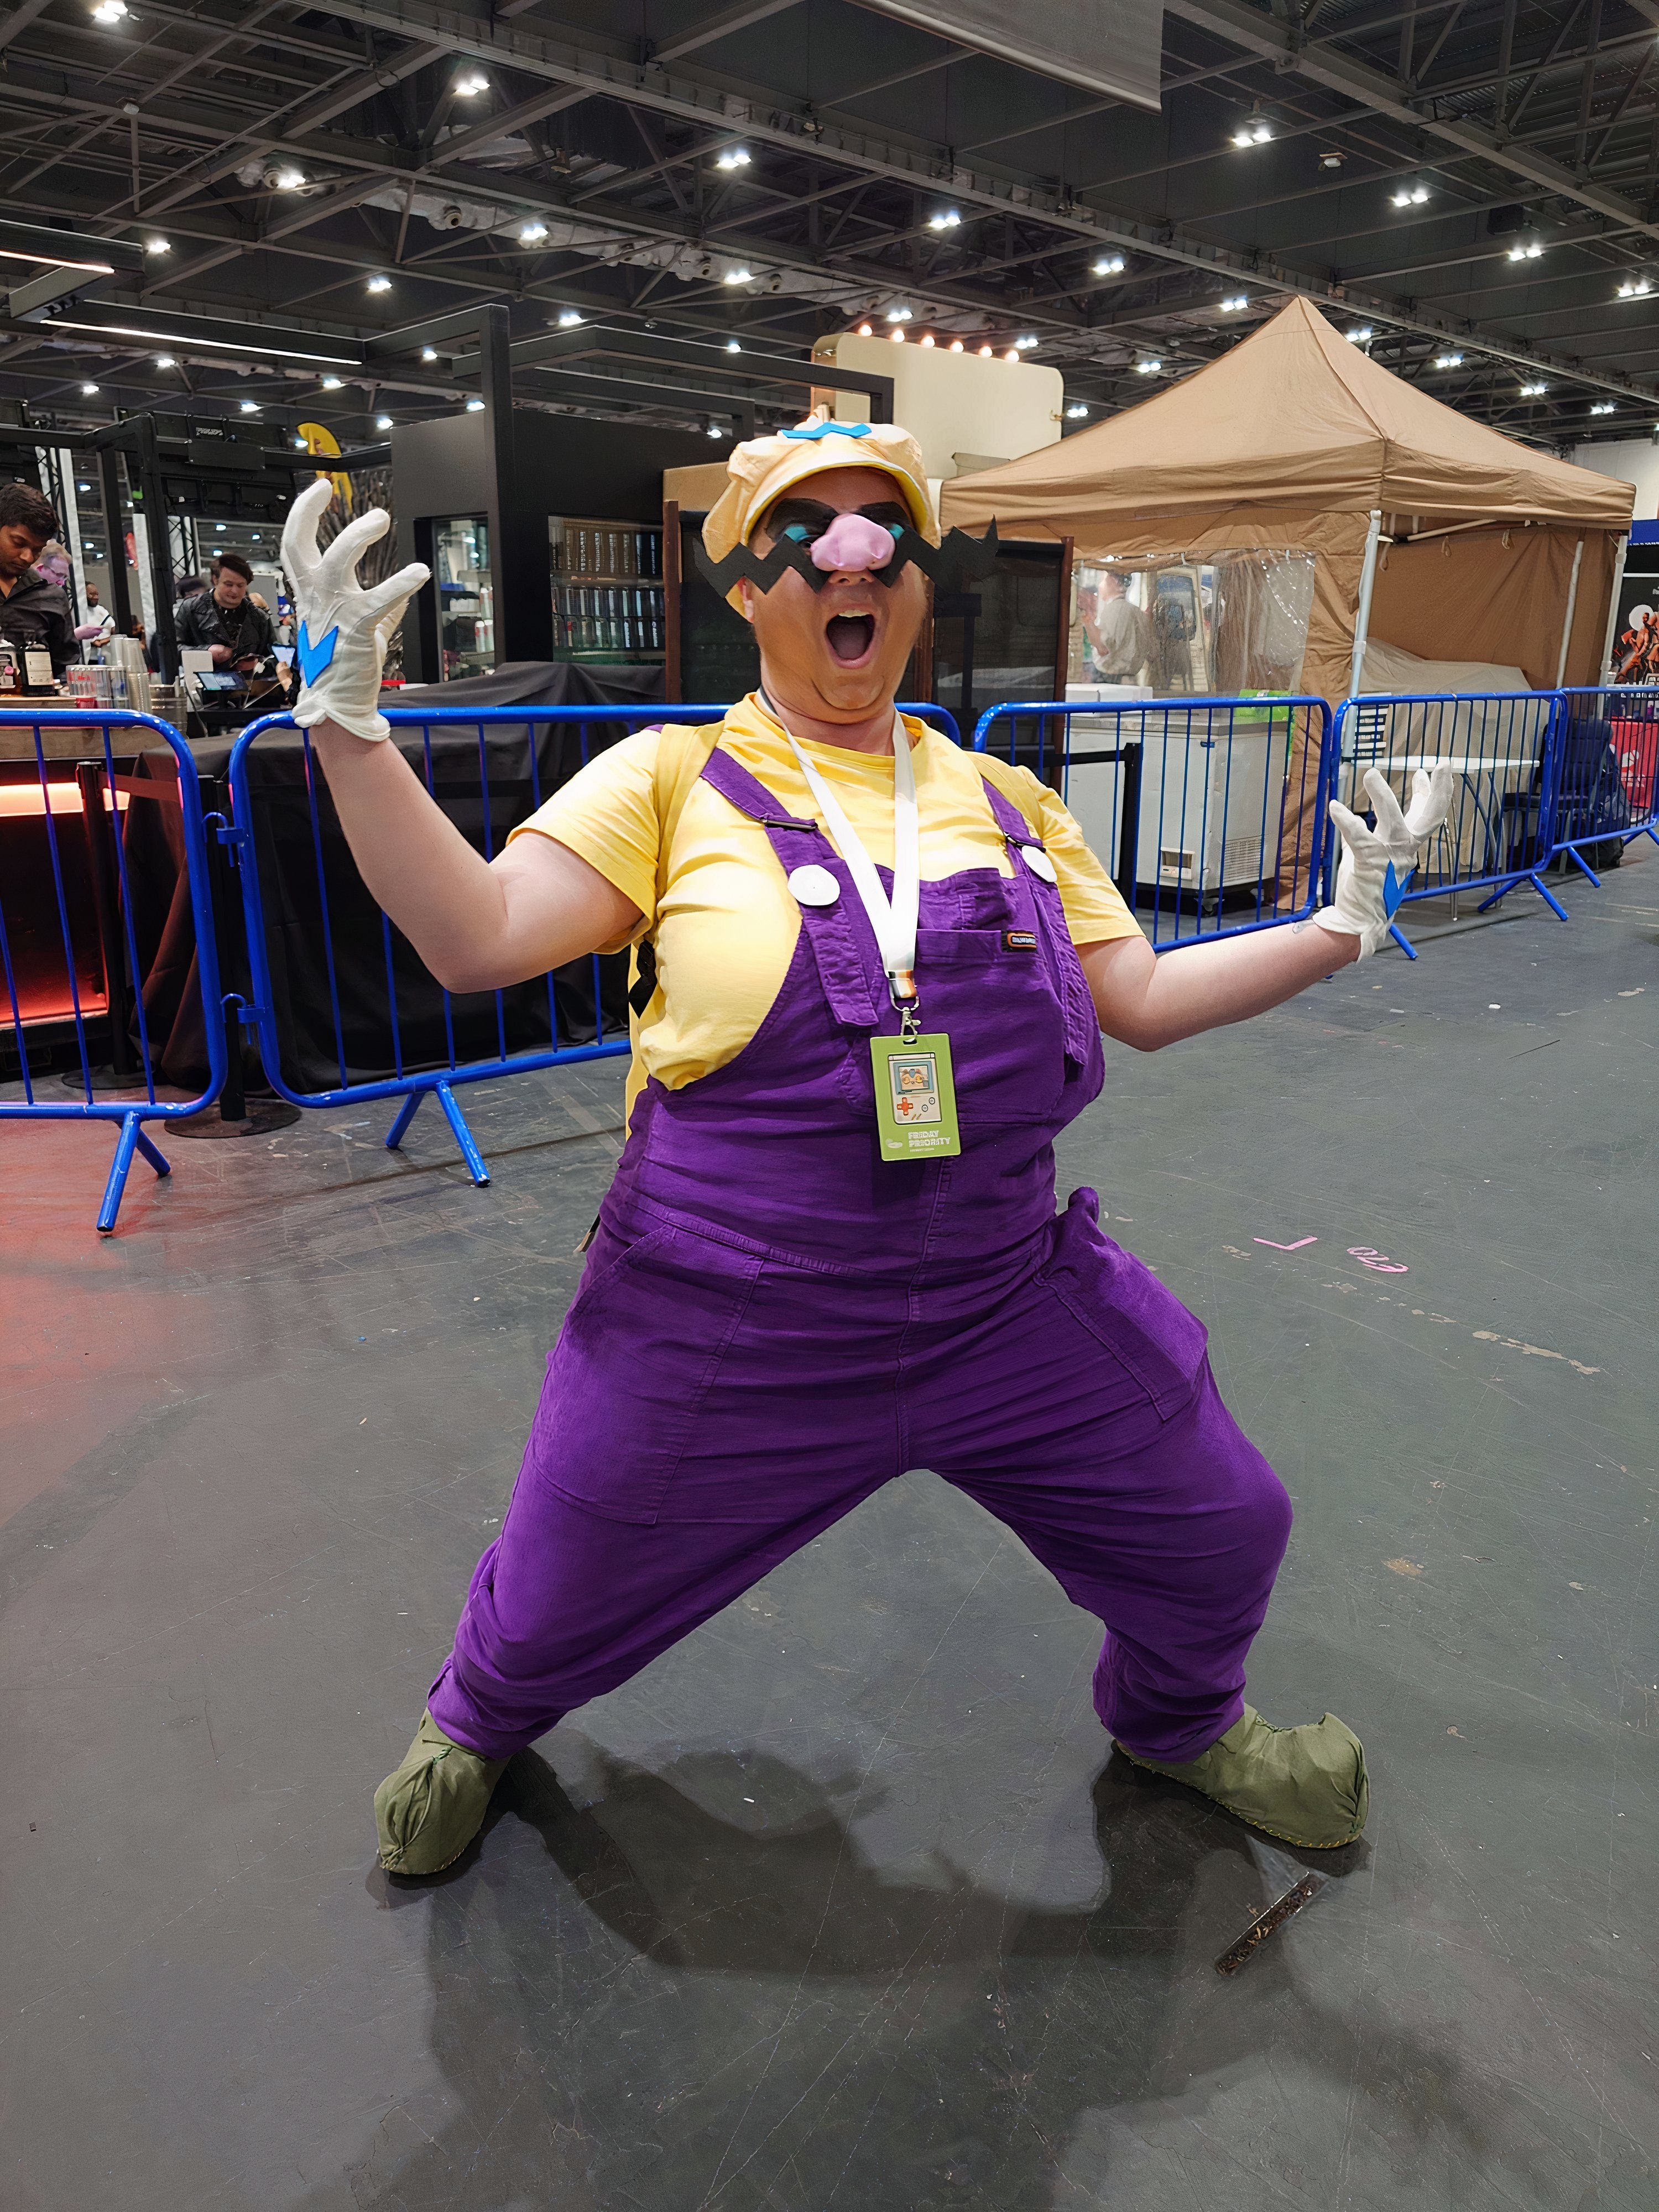 Onyxsonyx as Wario from the Super Mario series